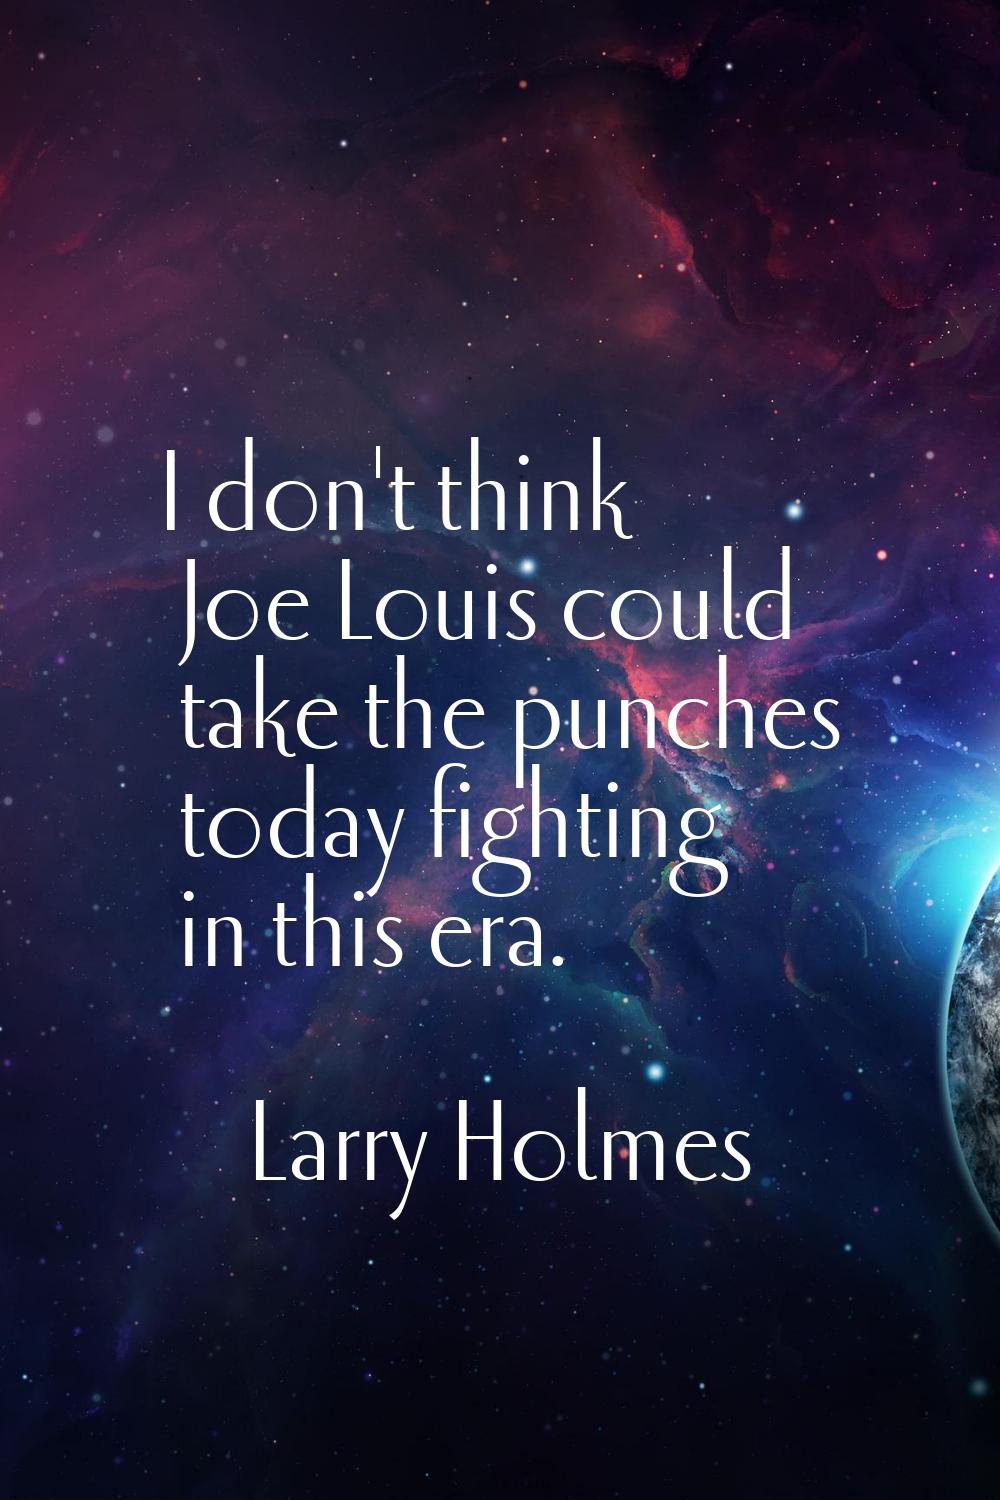 I don't think Joe Louis could take the punches today fighting in this era.